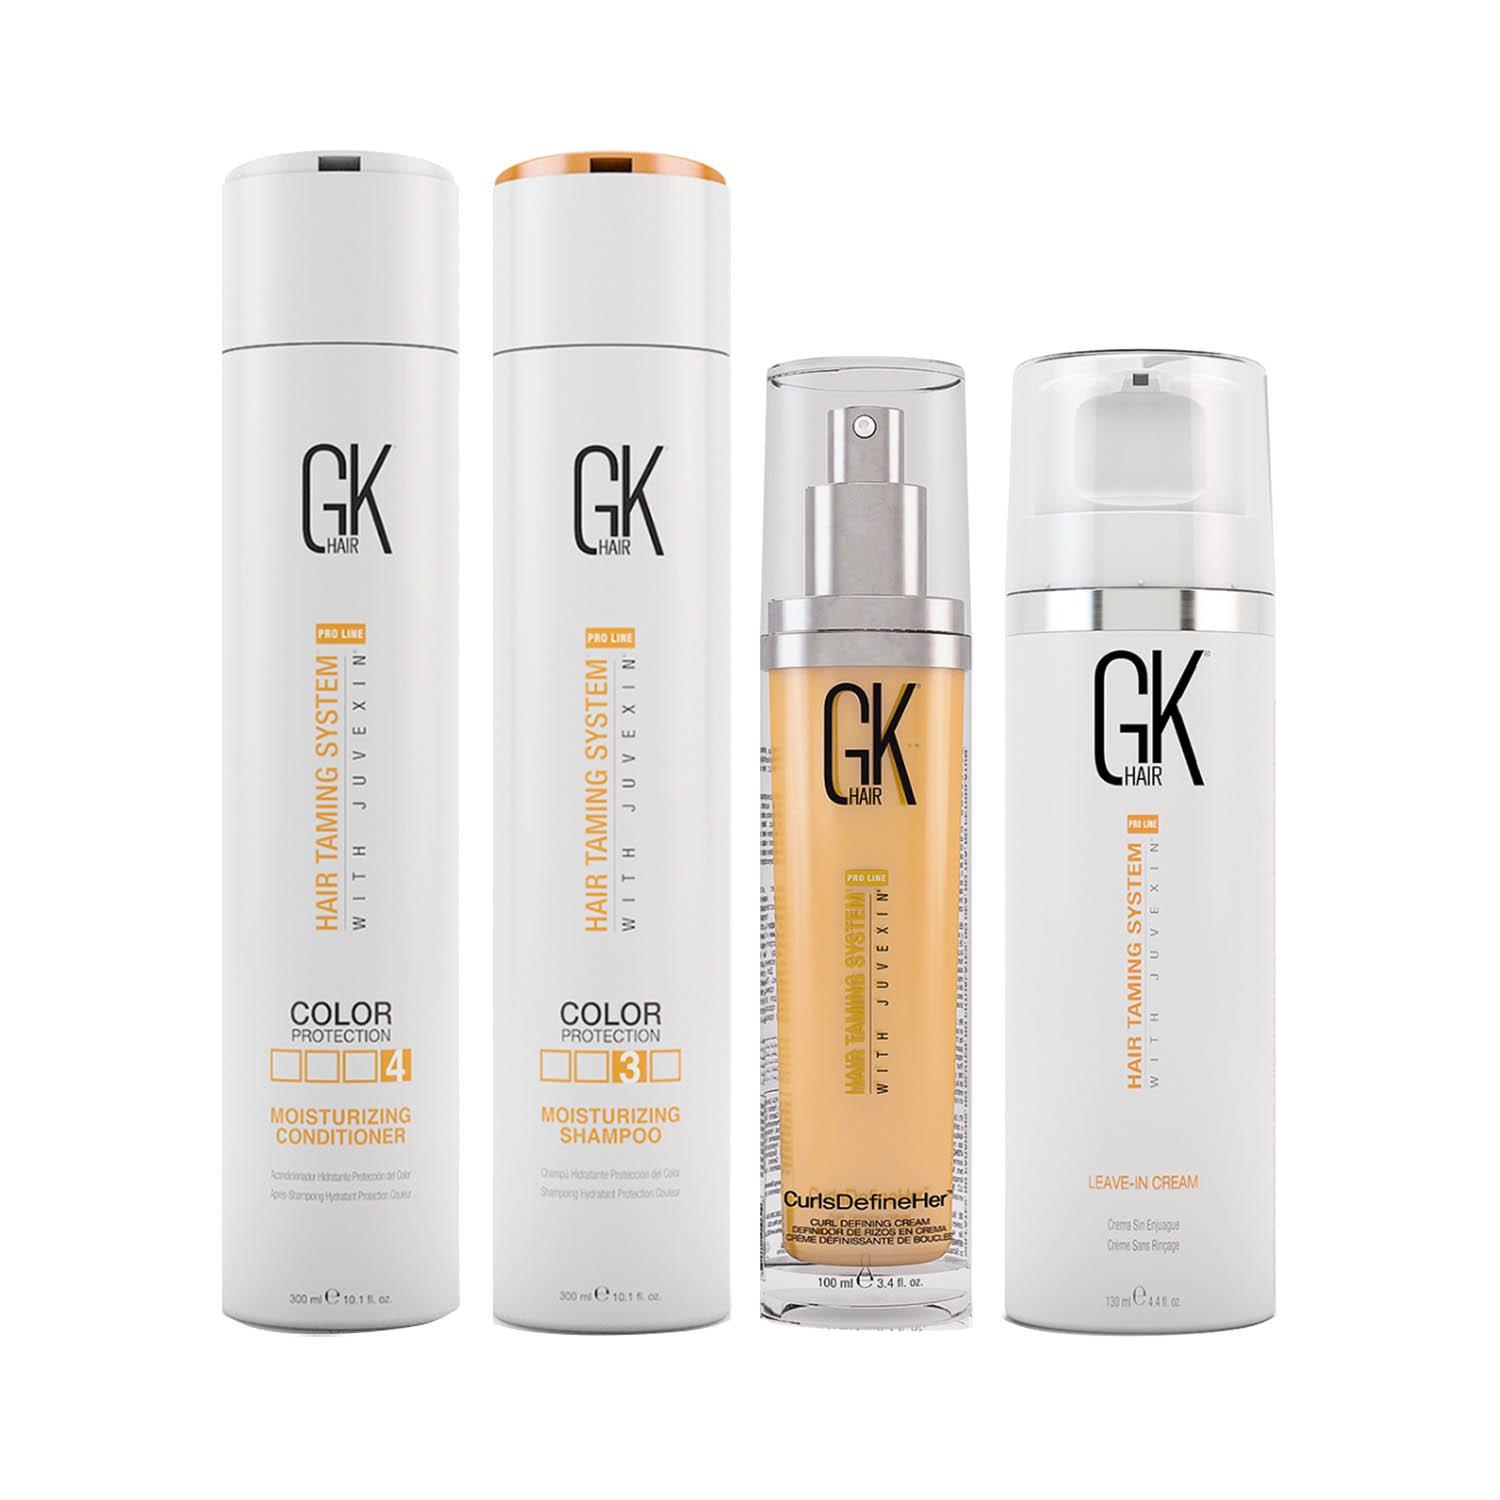 GK Hair Moisturizing Shampoo and Conditioner,Curls Defineher Cream, leave-in Conditioner Spray Combo